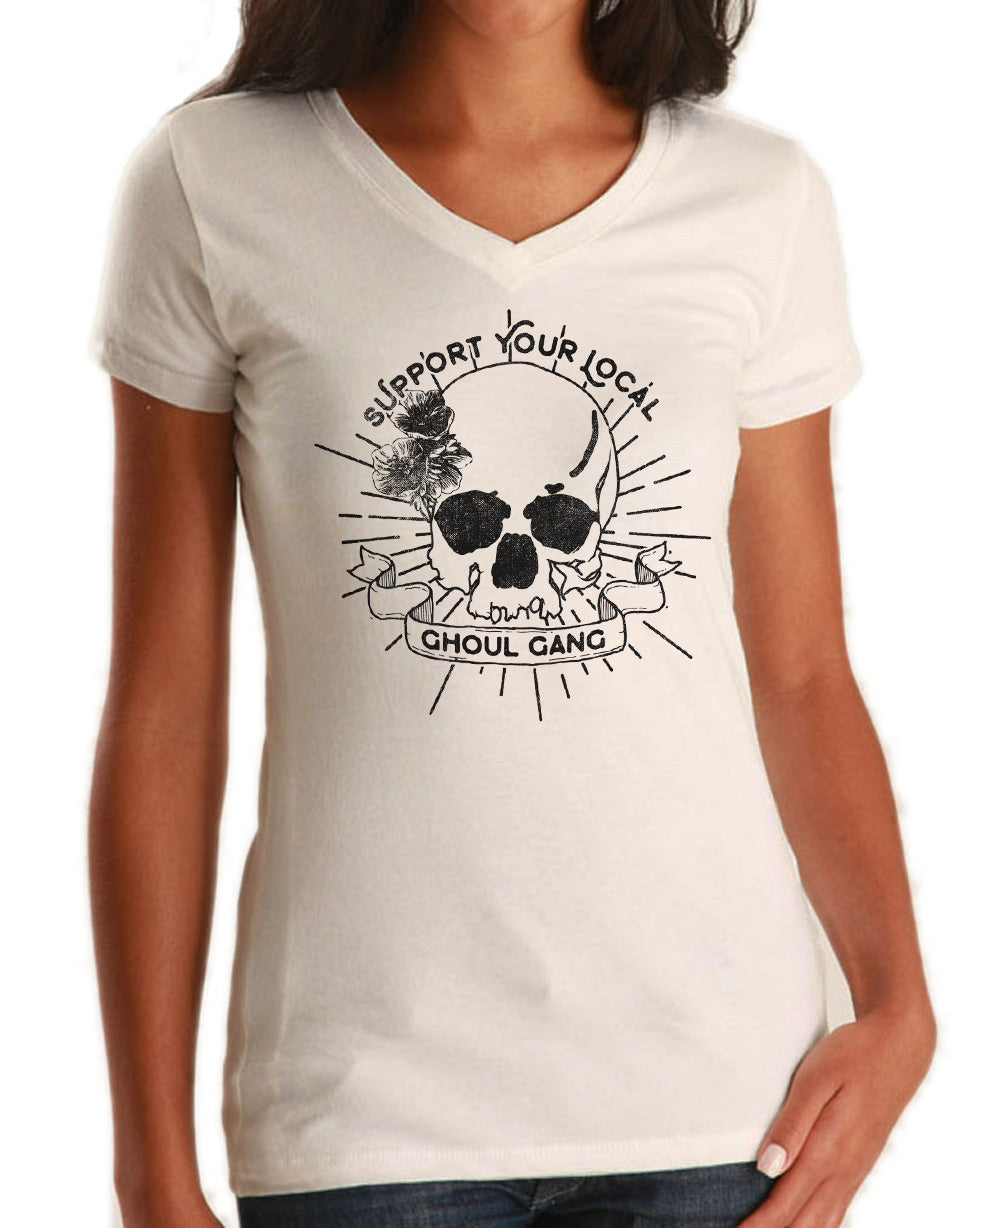 Women's Support Your Local Ghoul Gang Vneck T-Shirt